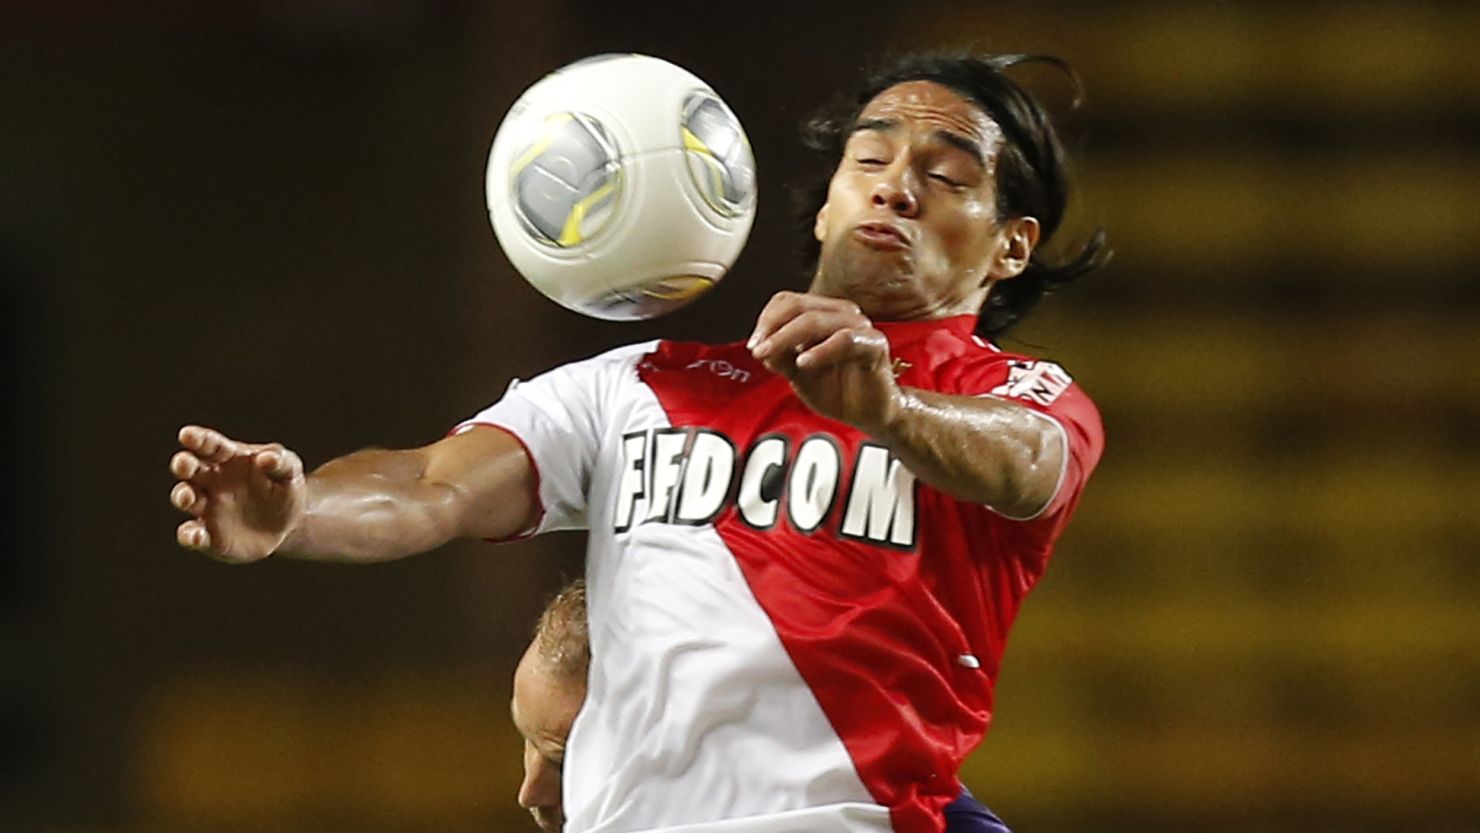 Monaco's Radamel Falcao battles for the ball in front of empty stands in their home match against Toulouse.